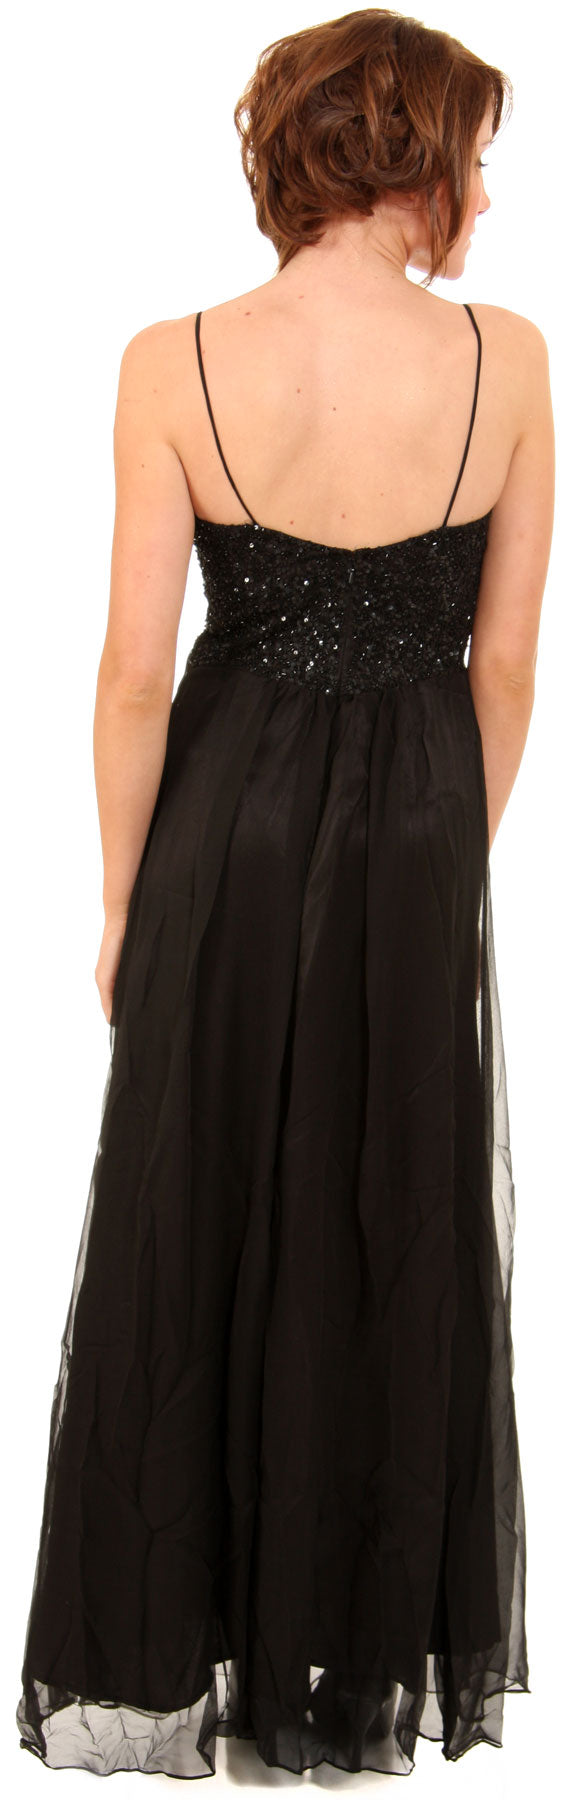 Back image of Two Tone Butterfly Top Formal Party Dress